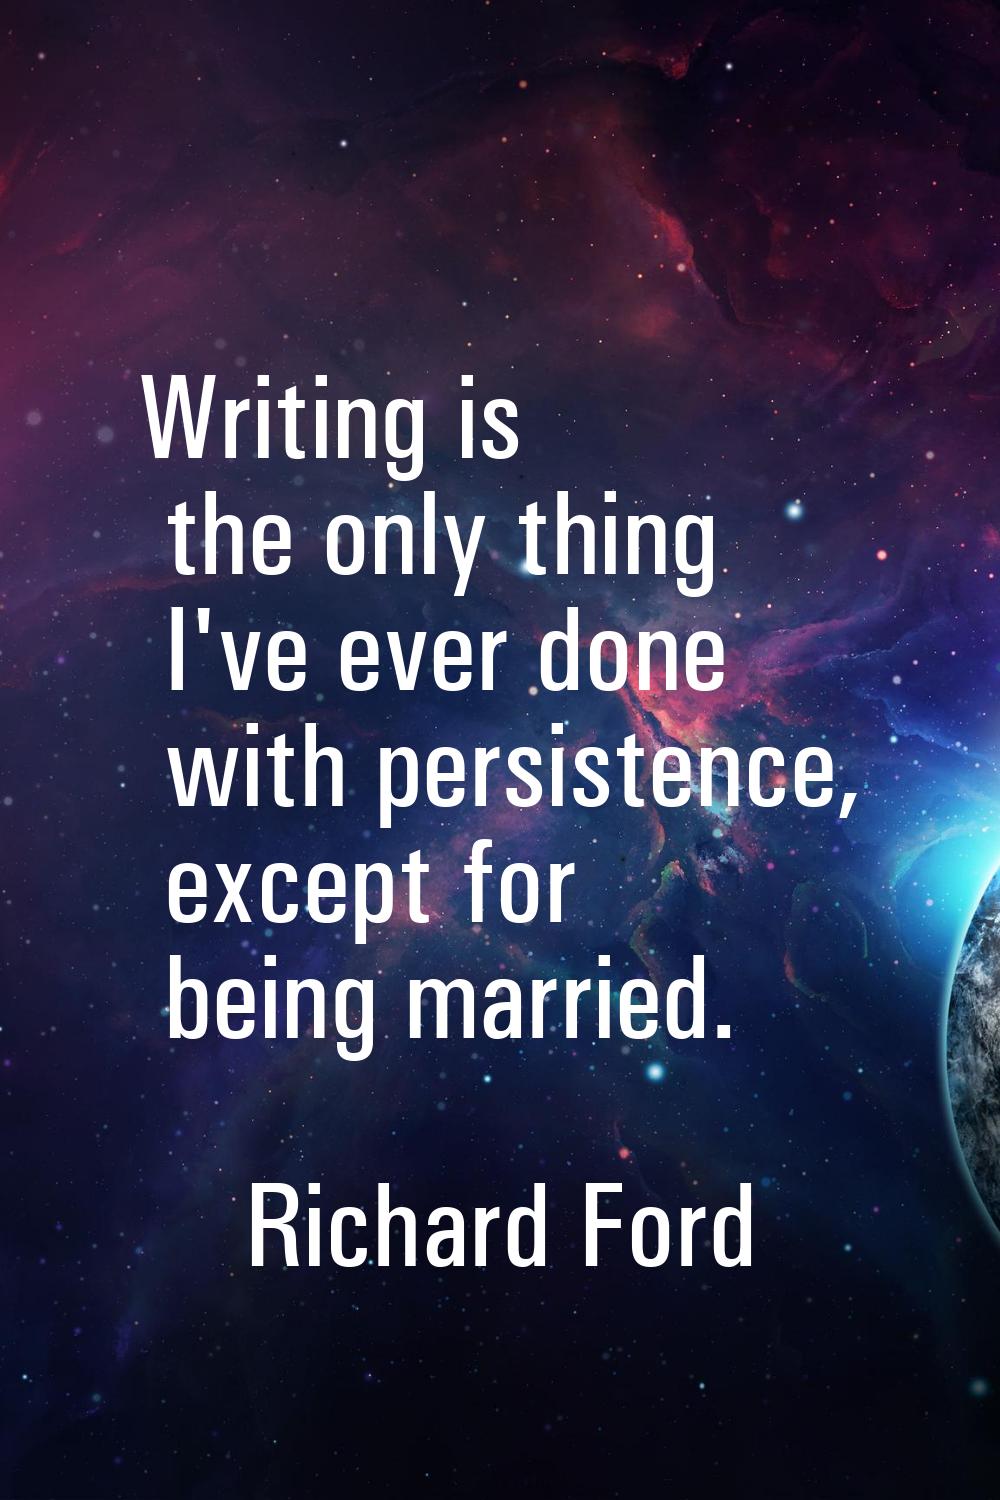 Writing is the only thing I've ever done with persistence, except for being married.